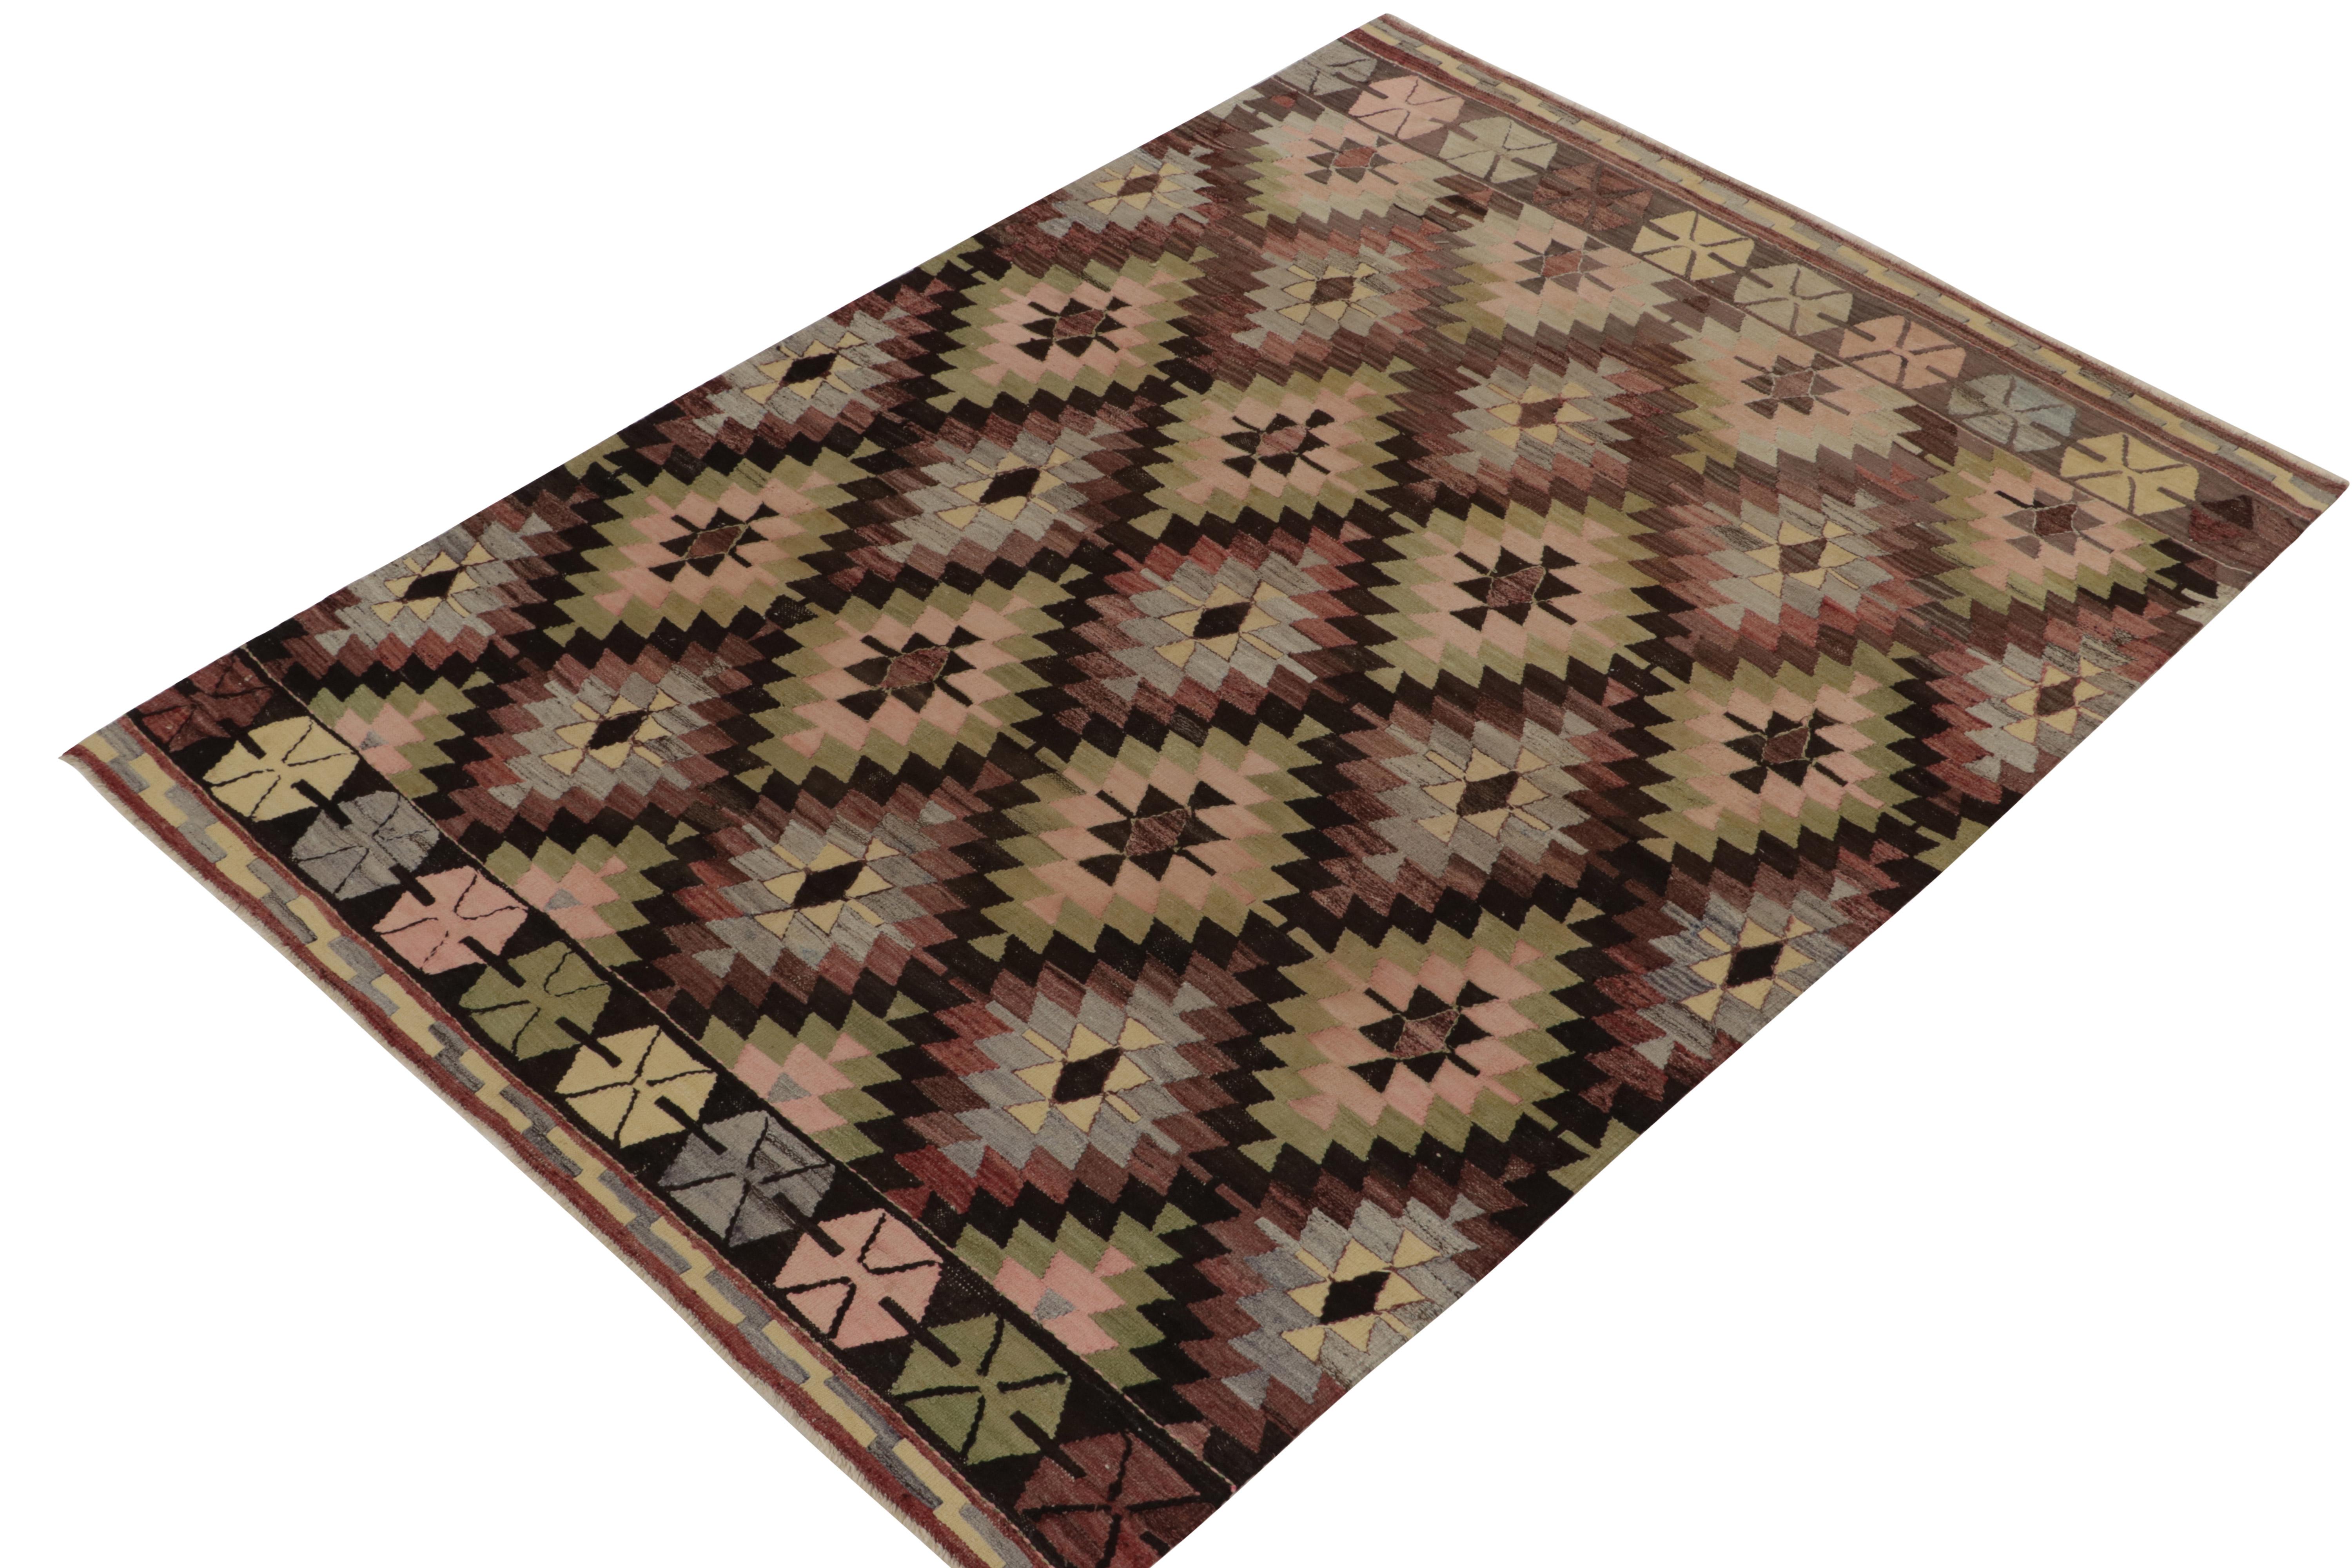 Originating from Turkey circa 1950-1960, a 6x8 vintage kilim rug from our flatweave selections. Handwoven in wool, the rug enjoys rippling geometry in  the most unusual colors of green, blue, bordeaux-purple, black, and pink. Relishing a pleasing